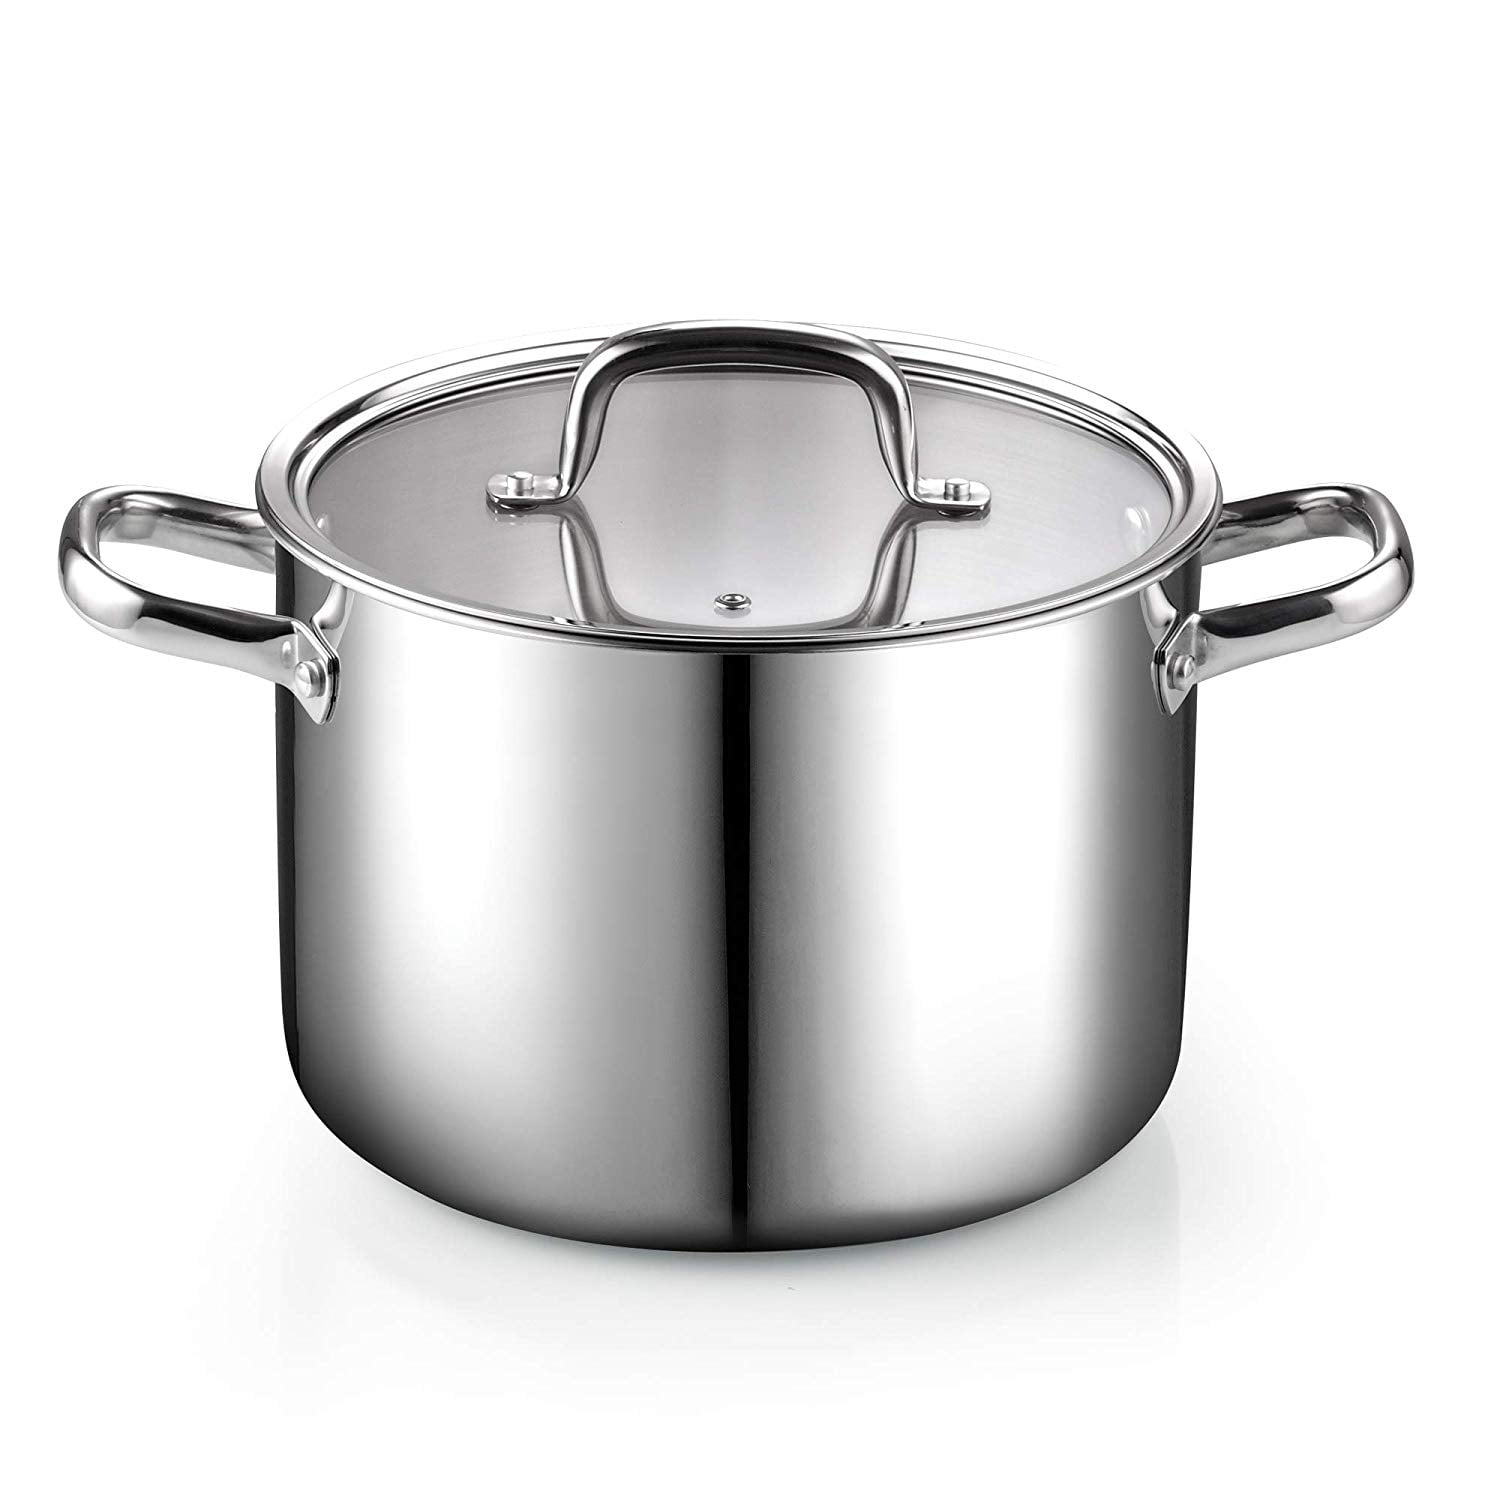 Cook N Home 02681 Tri-Ply Clad Stainless Steel Stockpot with Lid, 8 Cook N Home Stainless Steel Stockpot